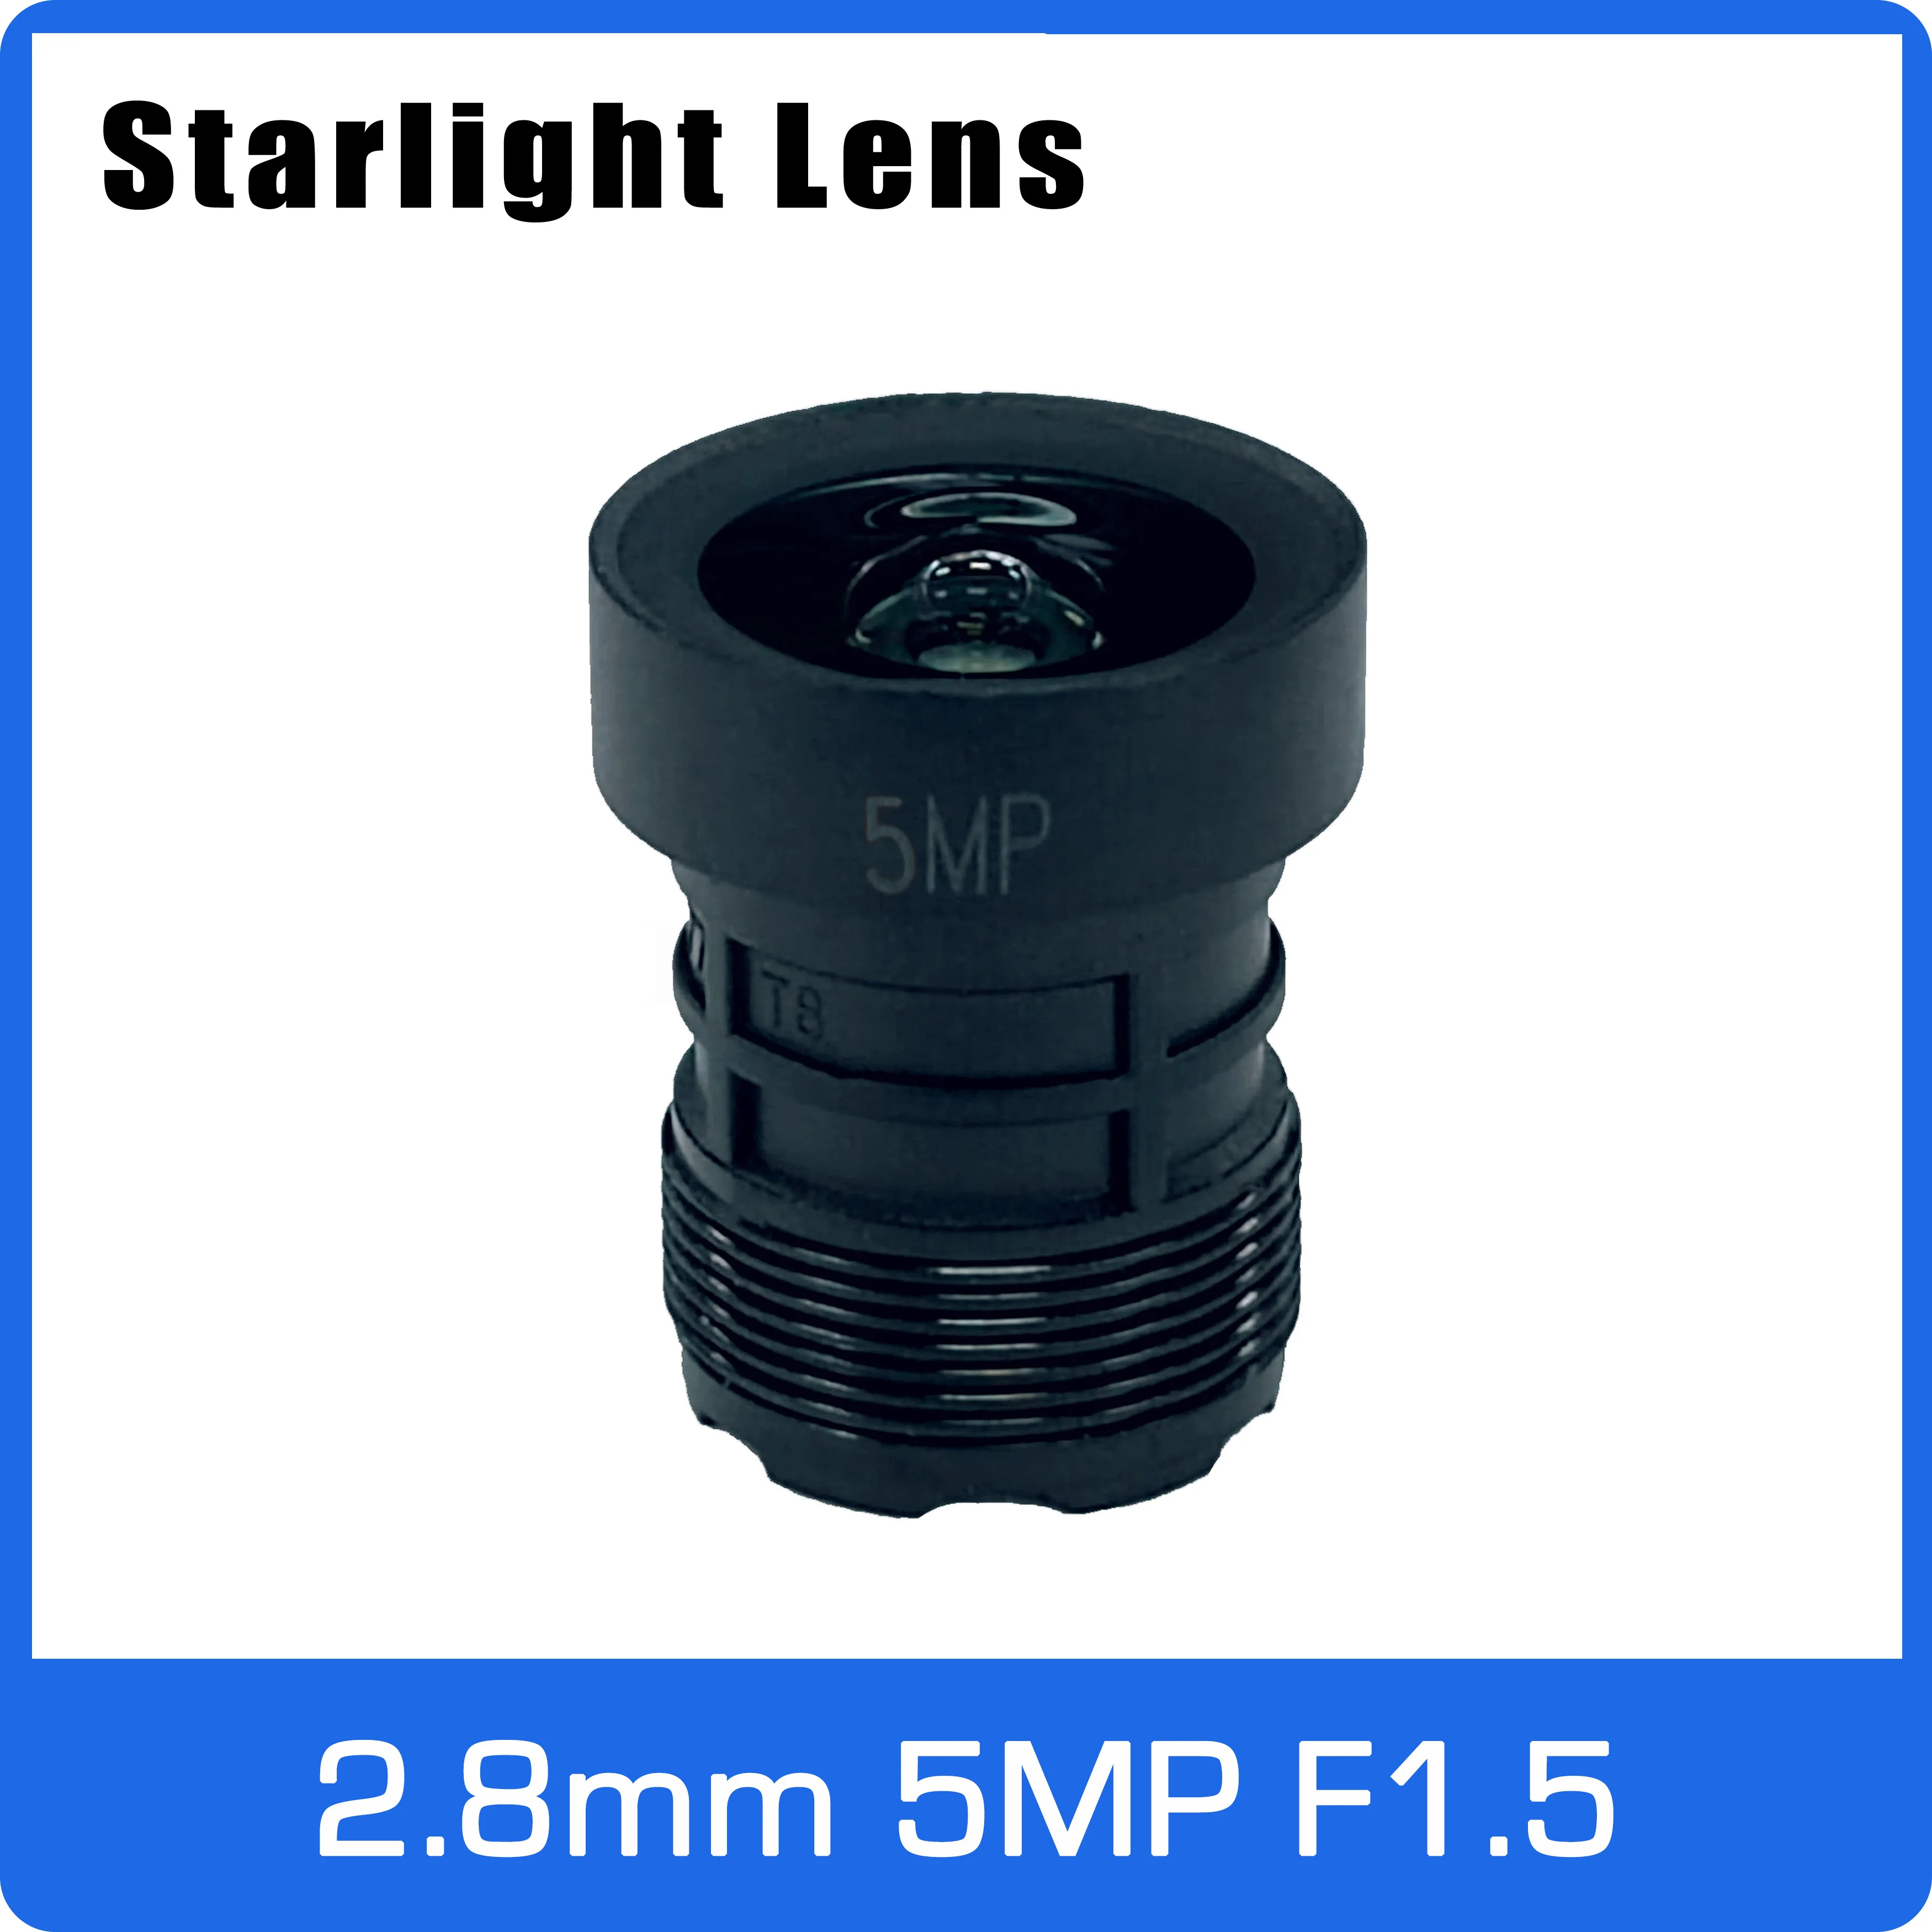 

Starlight Lens 5MP 2.8mm Fixed Aperture F1.5 Big Angle For SONY IMX335 Low Light CCTV AHD IP Camera Free Shipping